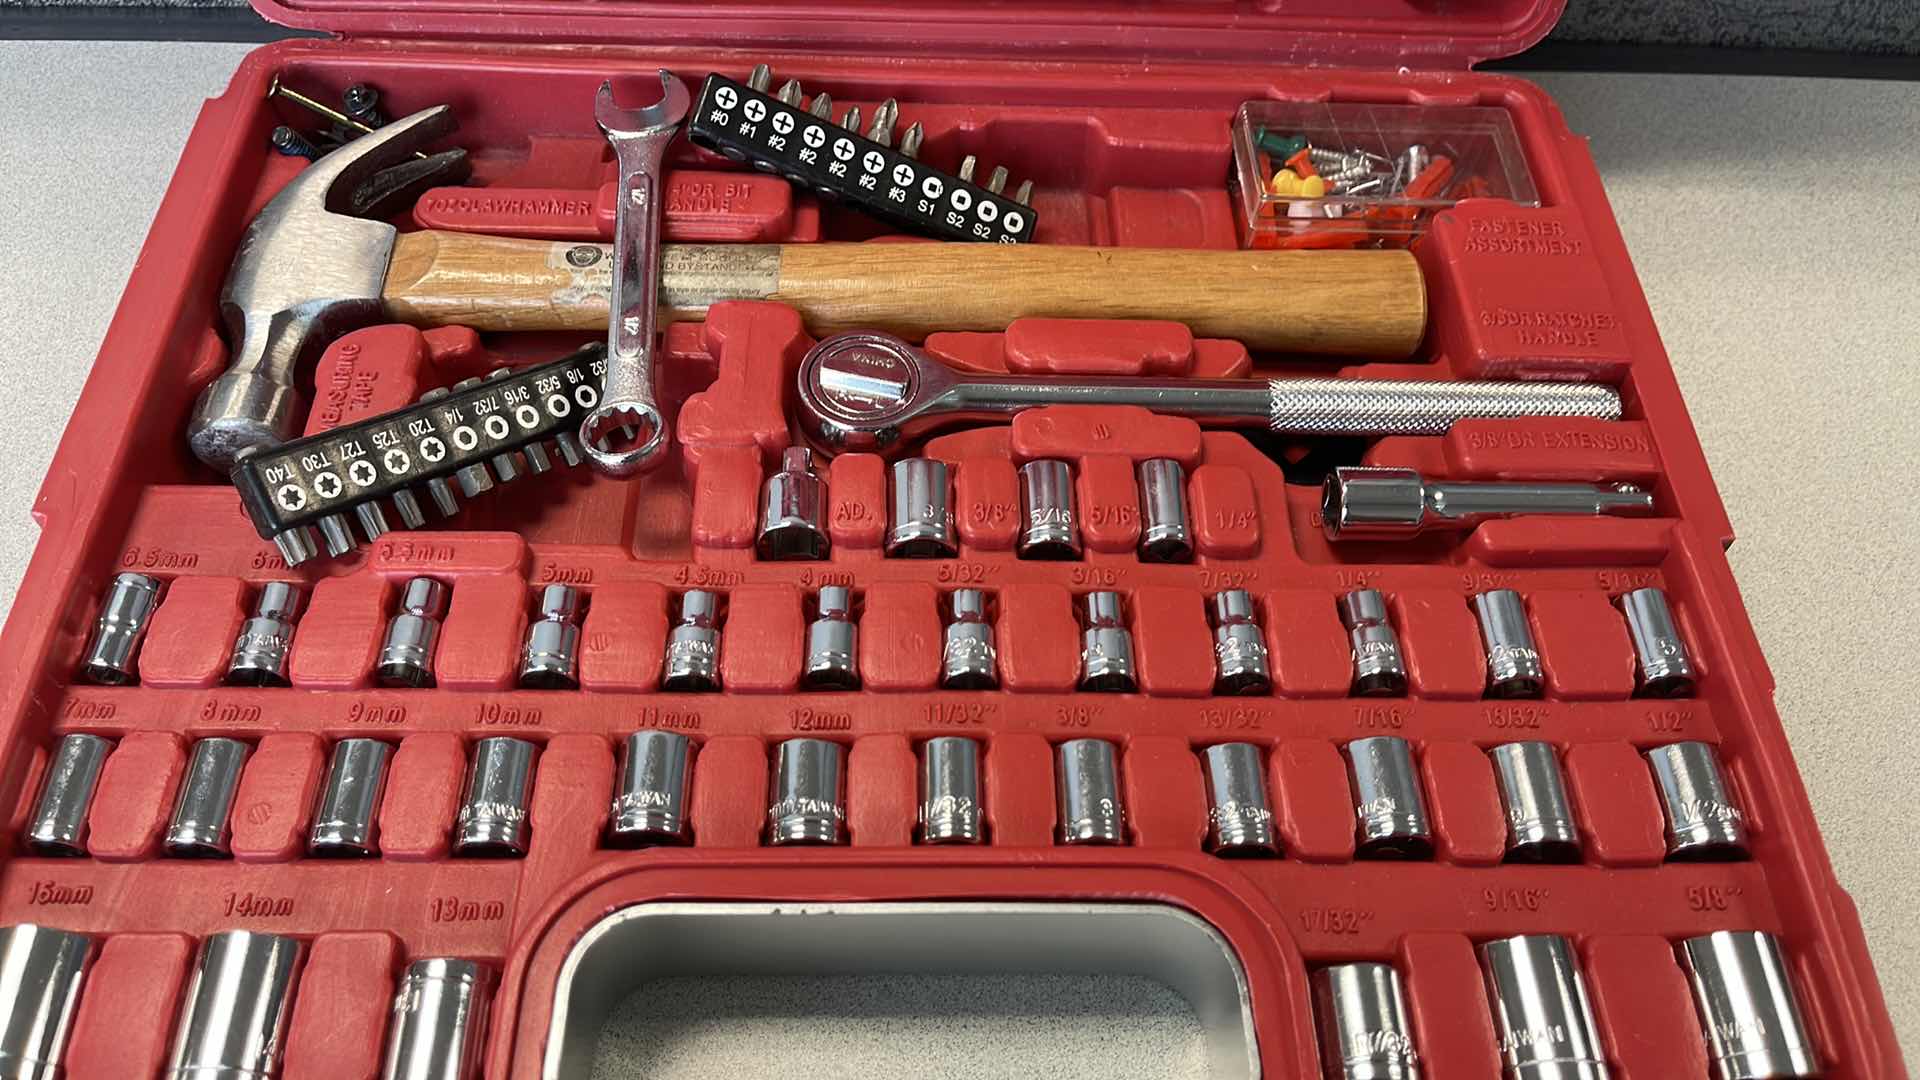 Photo 2 of YLTRA STEEL TOOL SET W CARRY CASE (MISSING TOOLS)